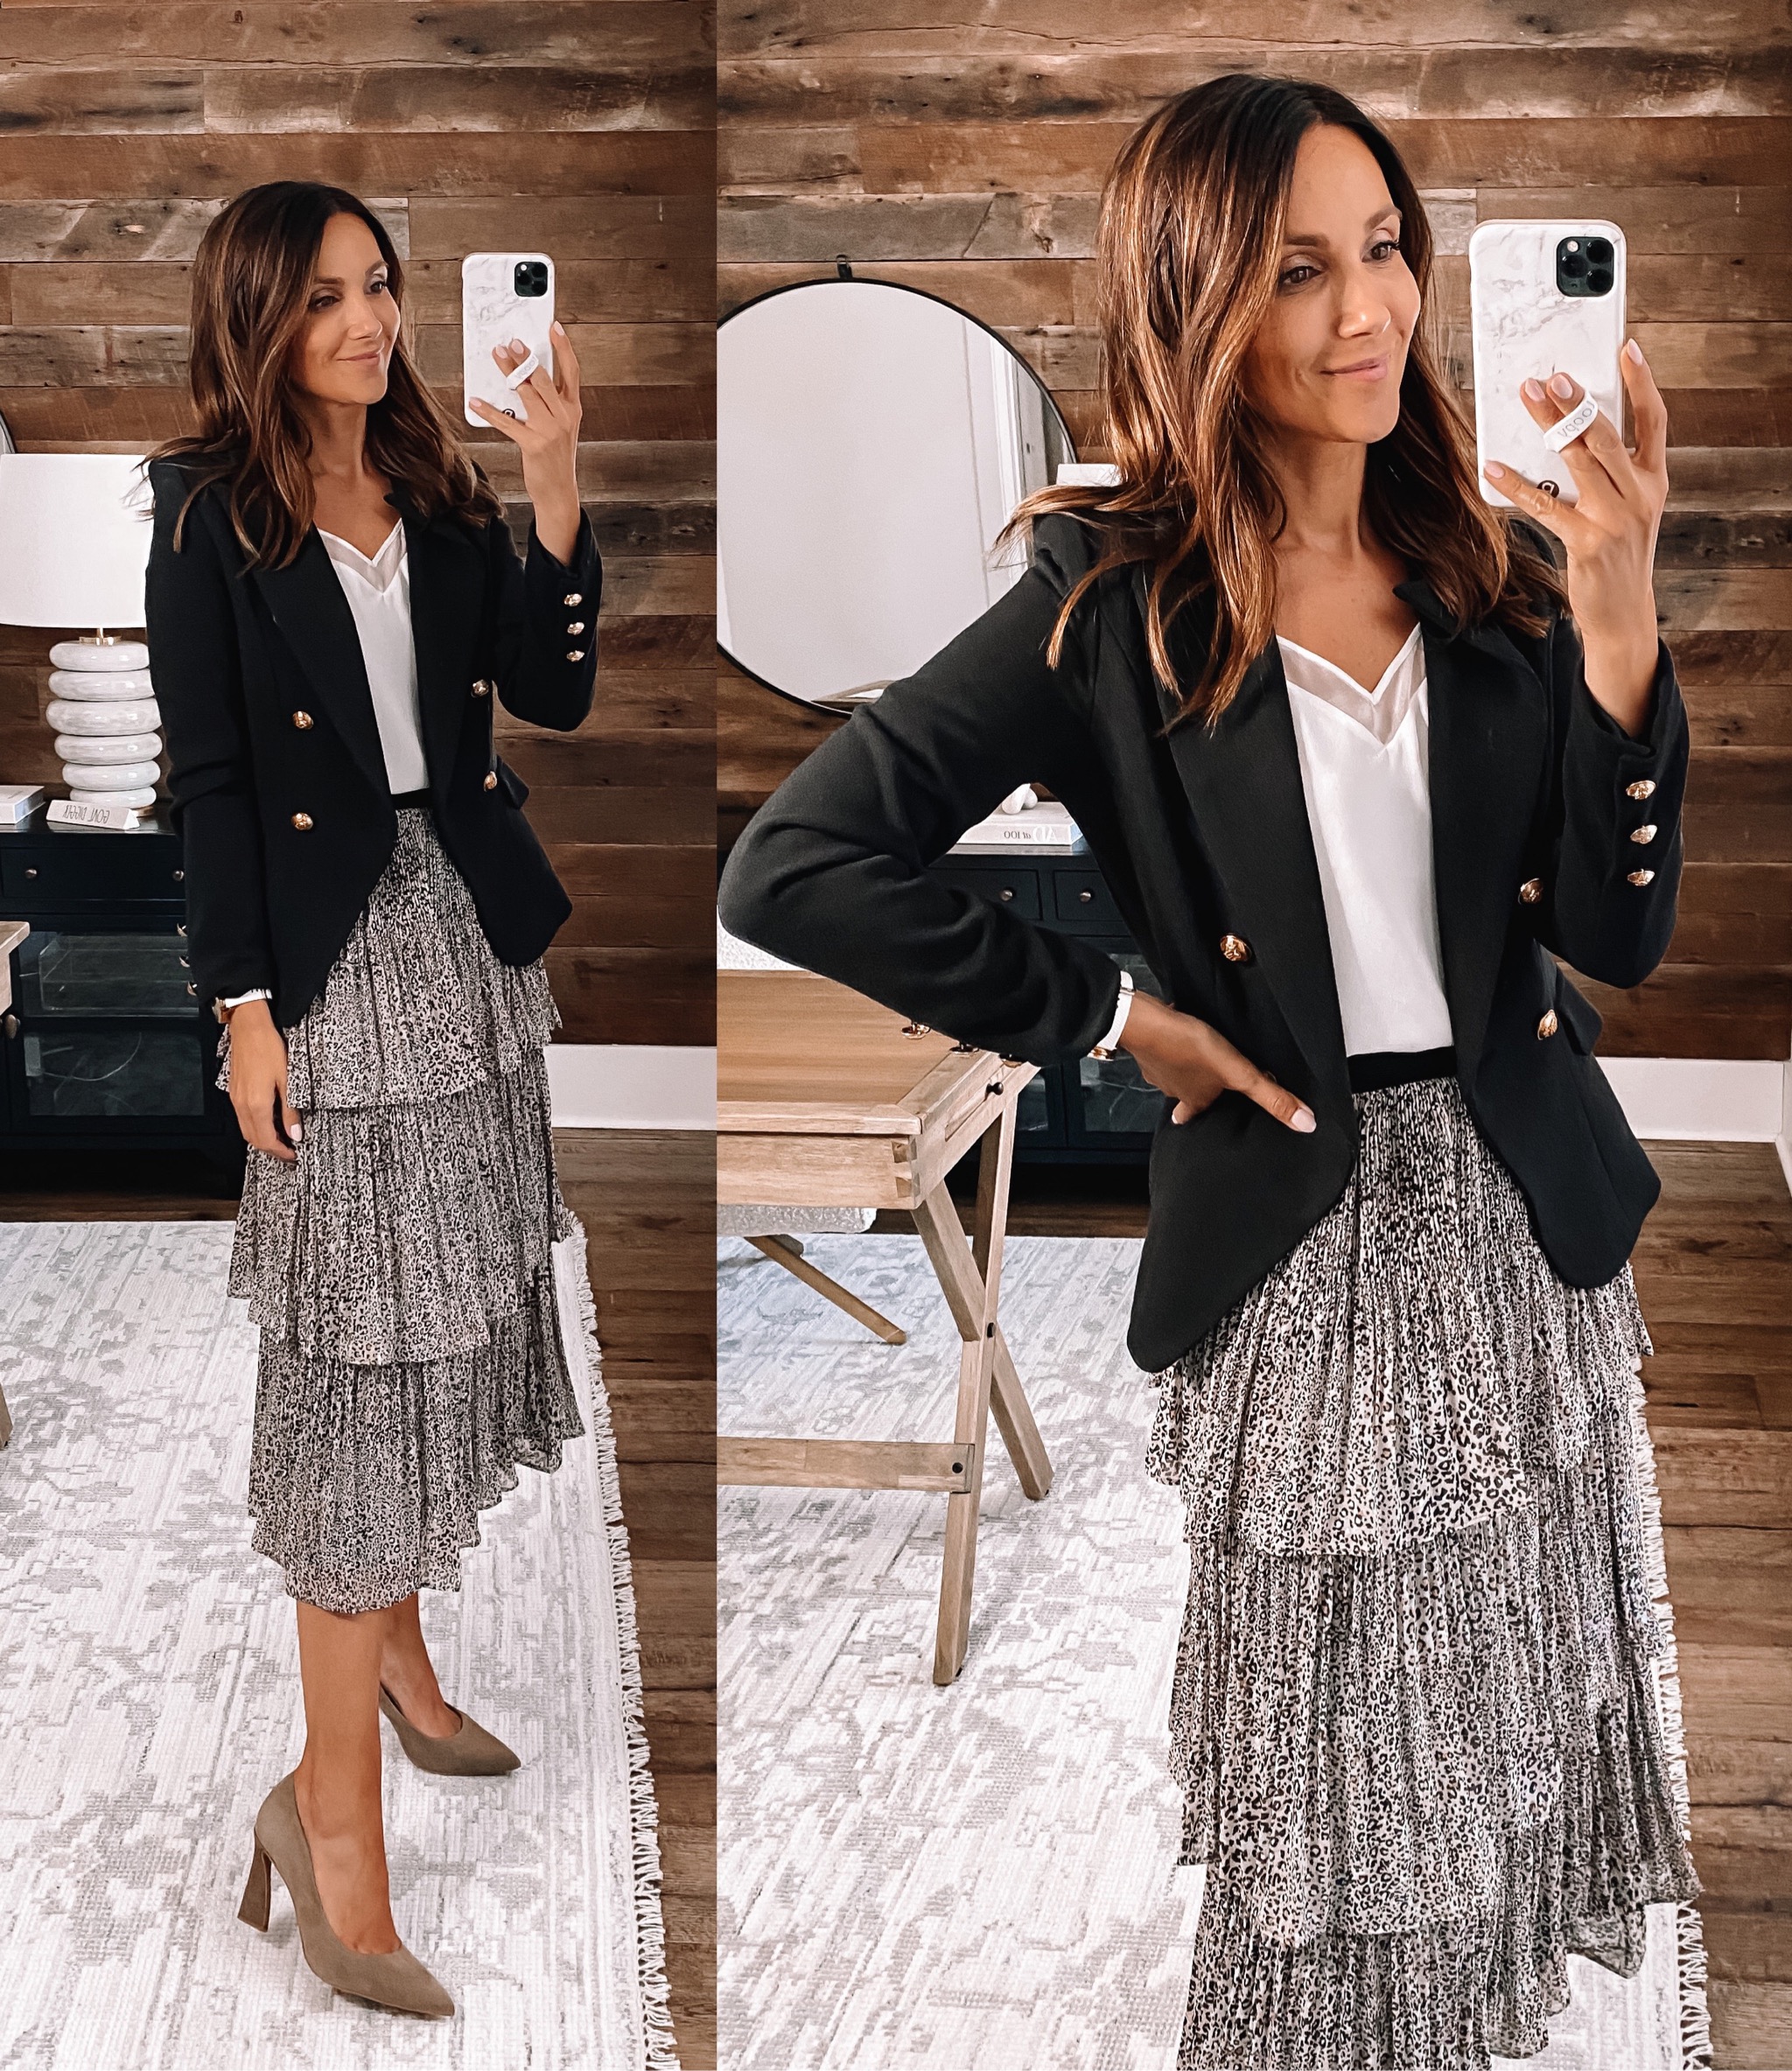 workwear outfit with skirt, fall workwear style